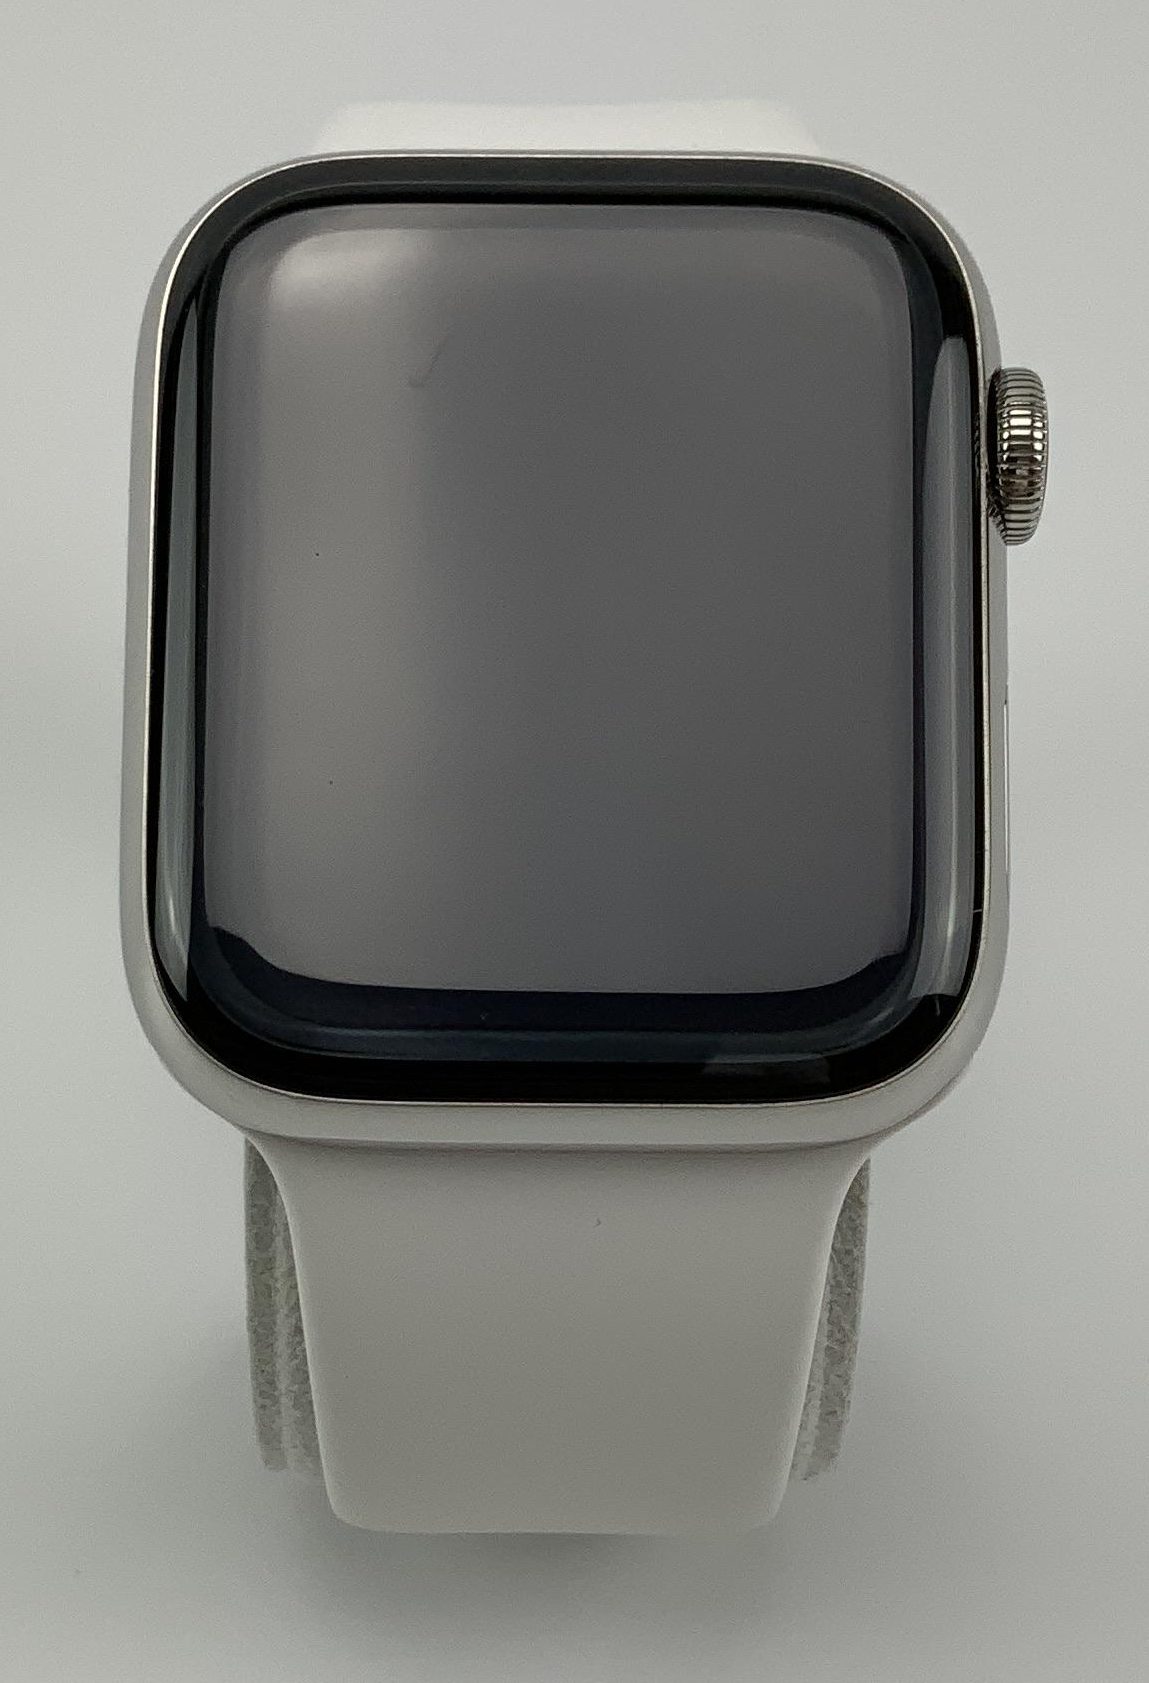 Watch Series 5 Steel Cellular (44mm), Silver, image 1